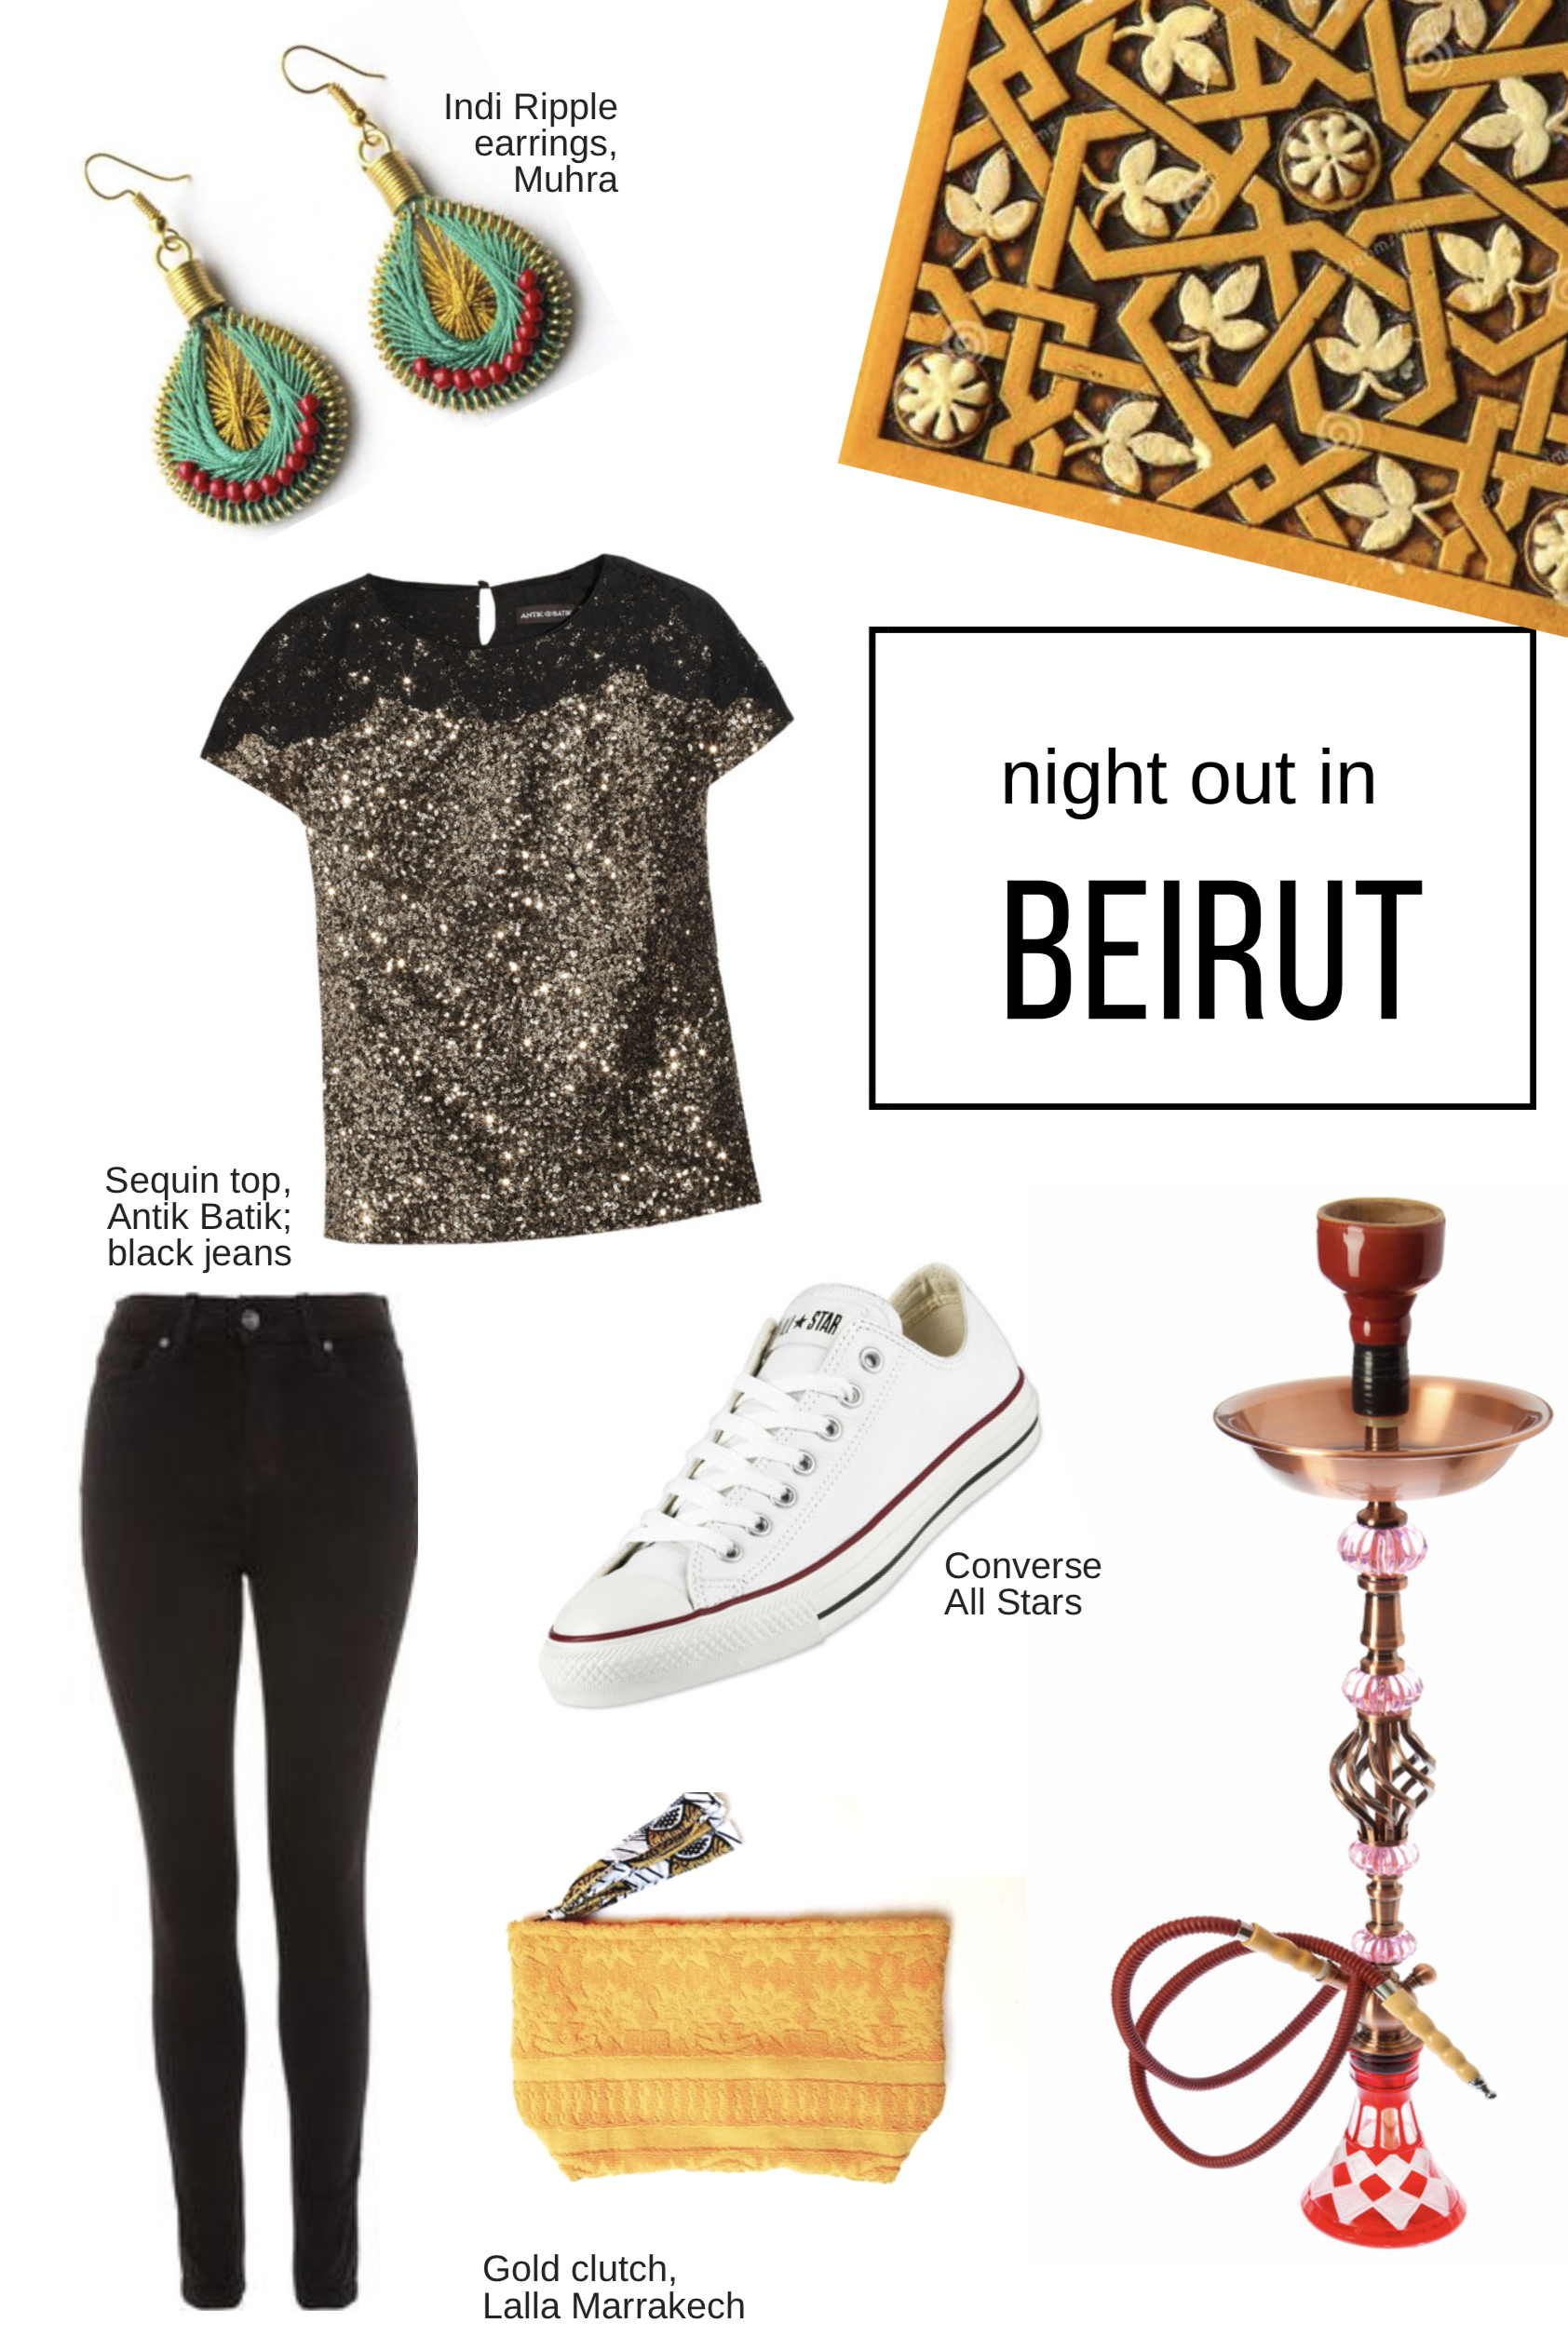 BEIRUT guide.png